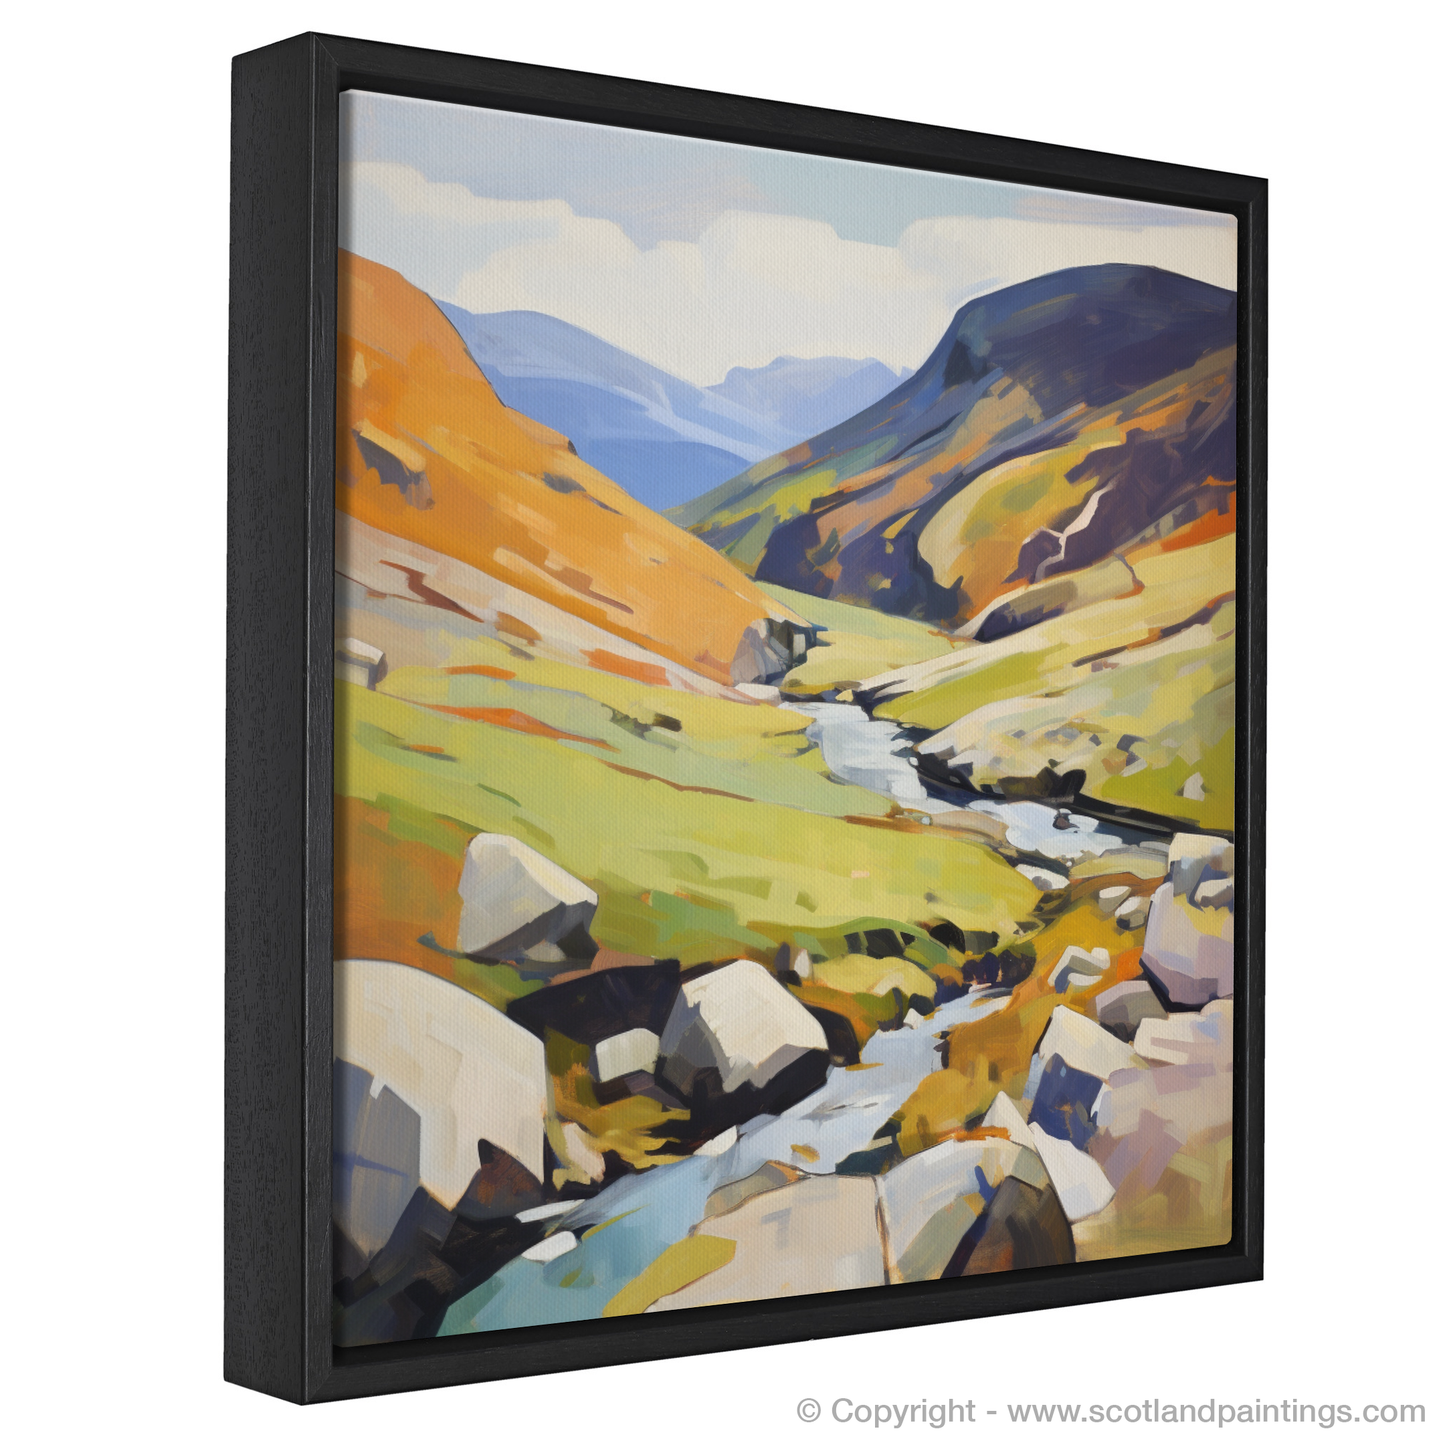 Painting and Art Print of Braeriach entitled "Braeriach Unleashed: An Abstract Highland Reverie".